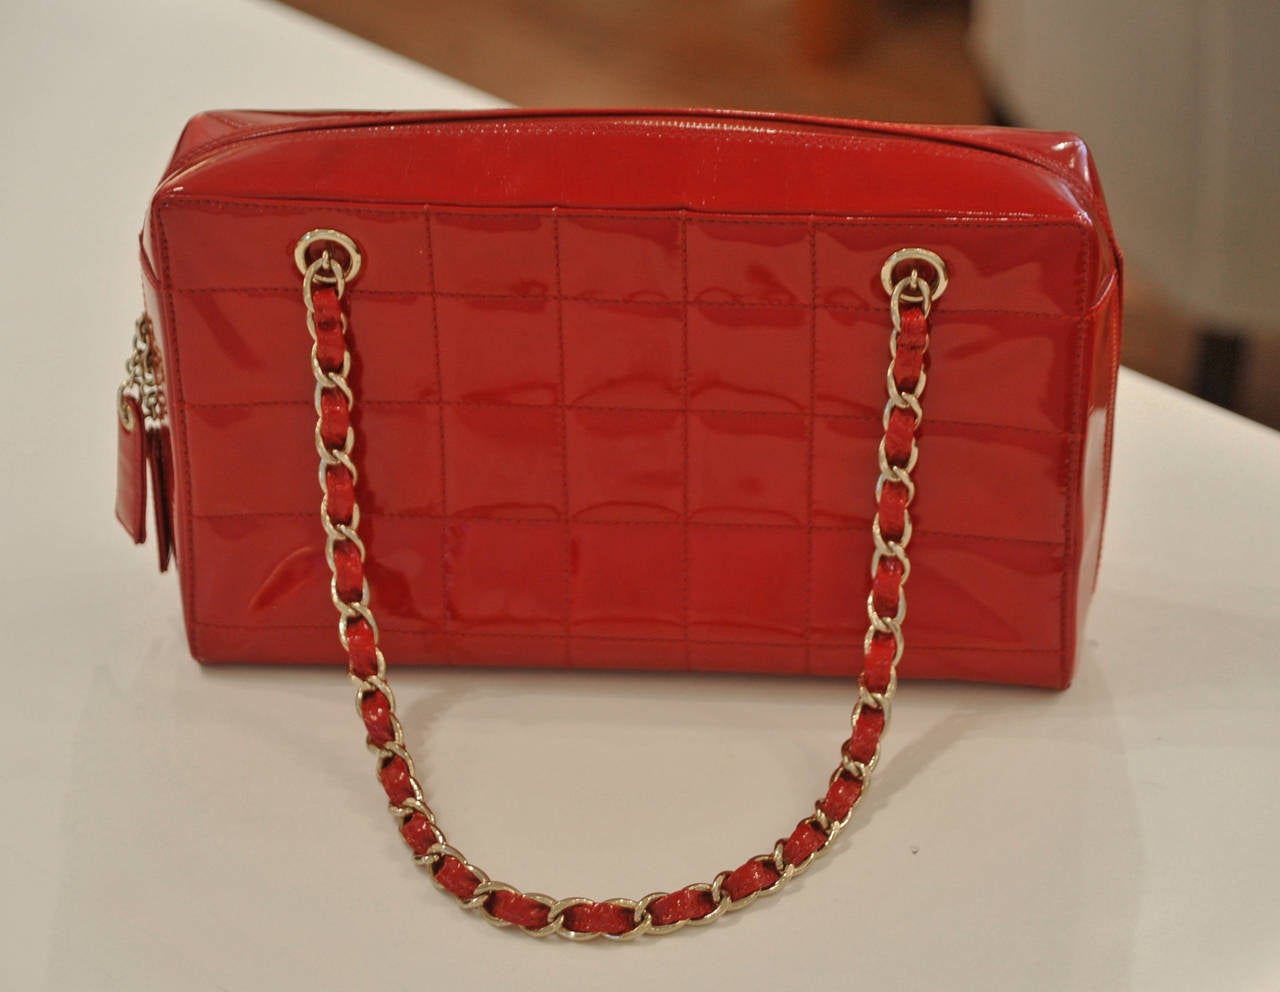 Chanel Candy Apple Red Patent Leather Bag 2